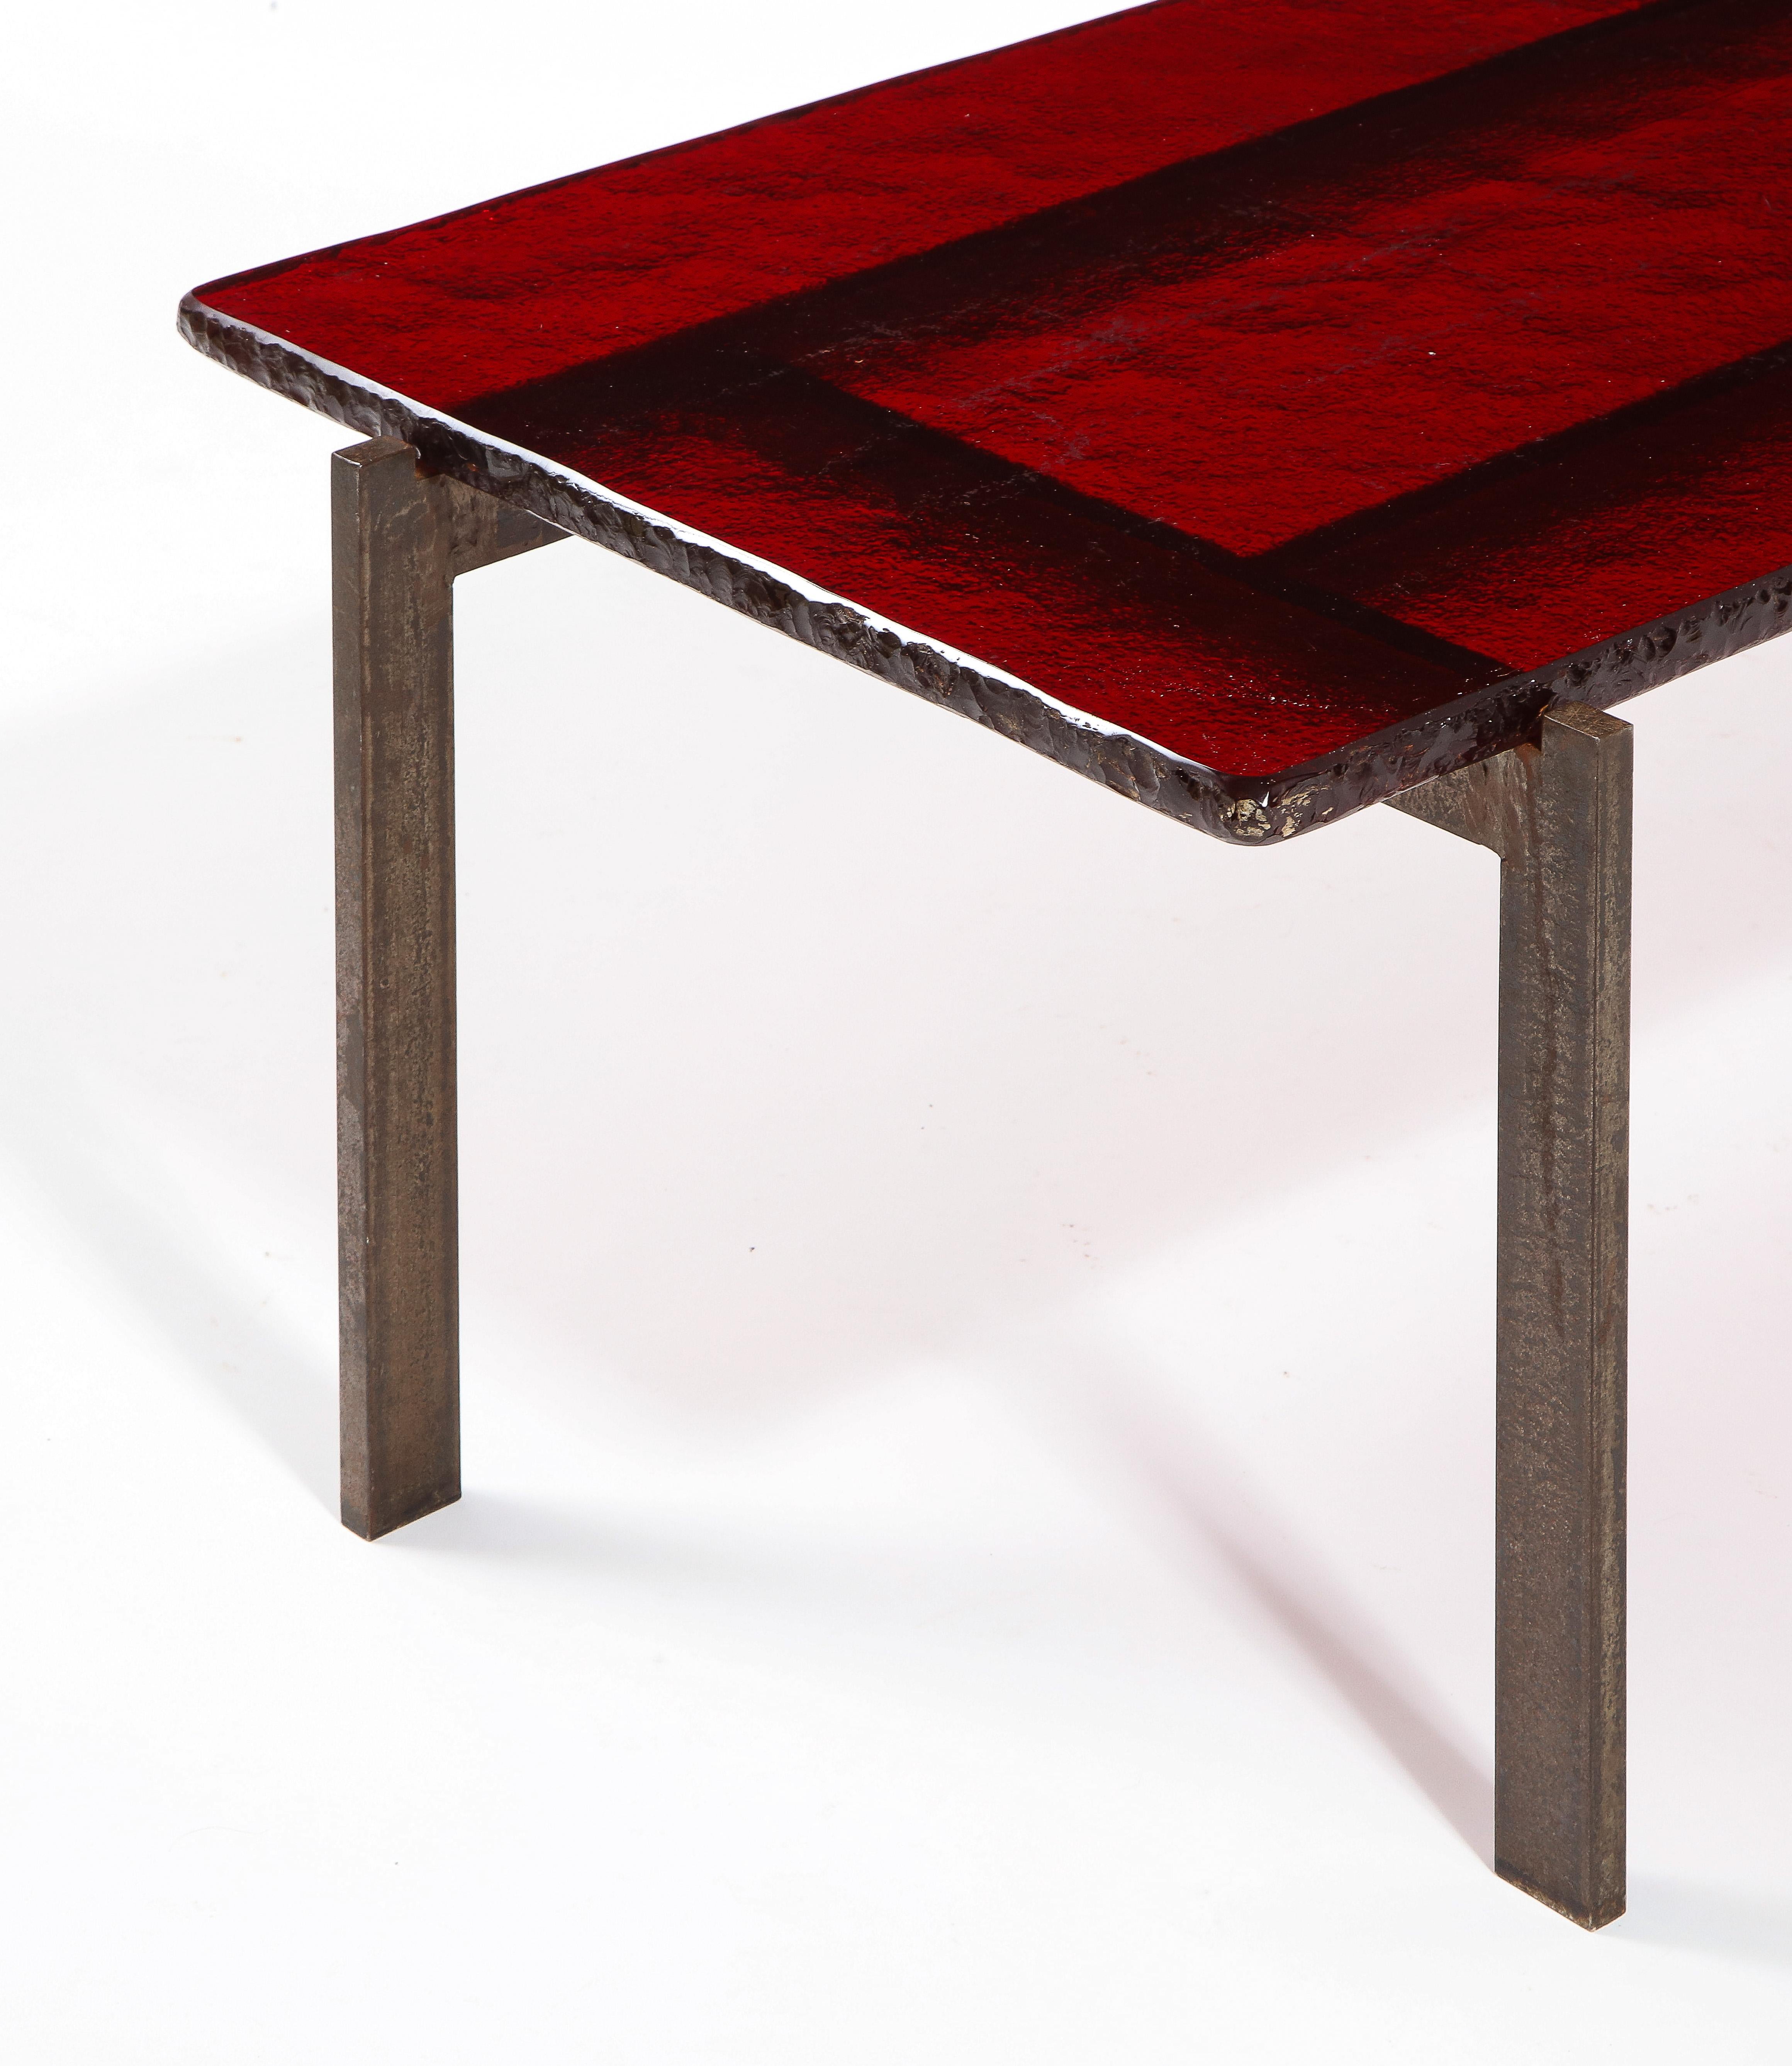 Hammered Ruby Red Saint Gobain Glass & Steel Modernist Coffee Table, France 1960's For Sale